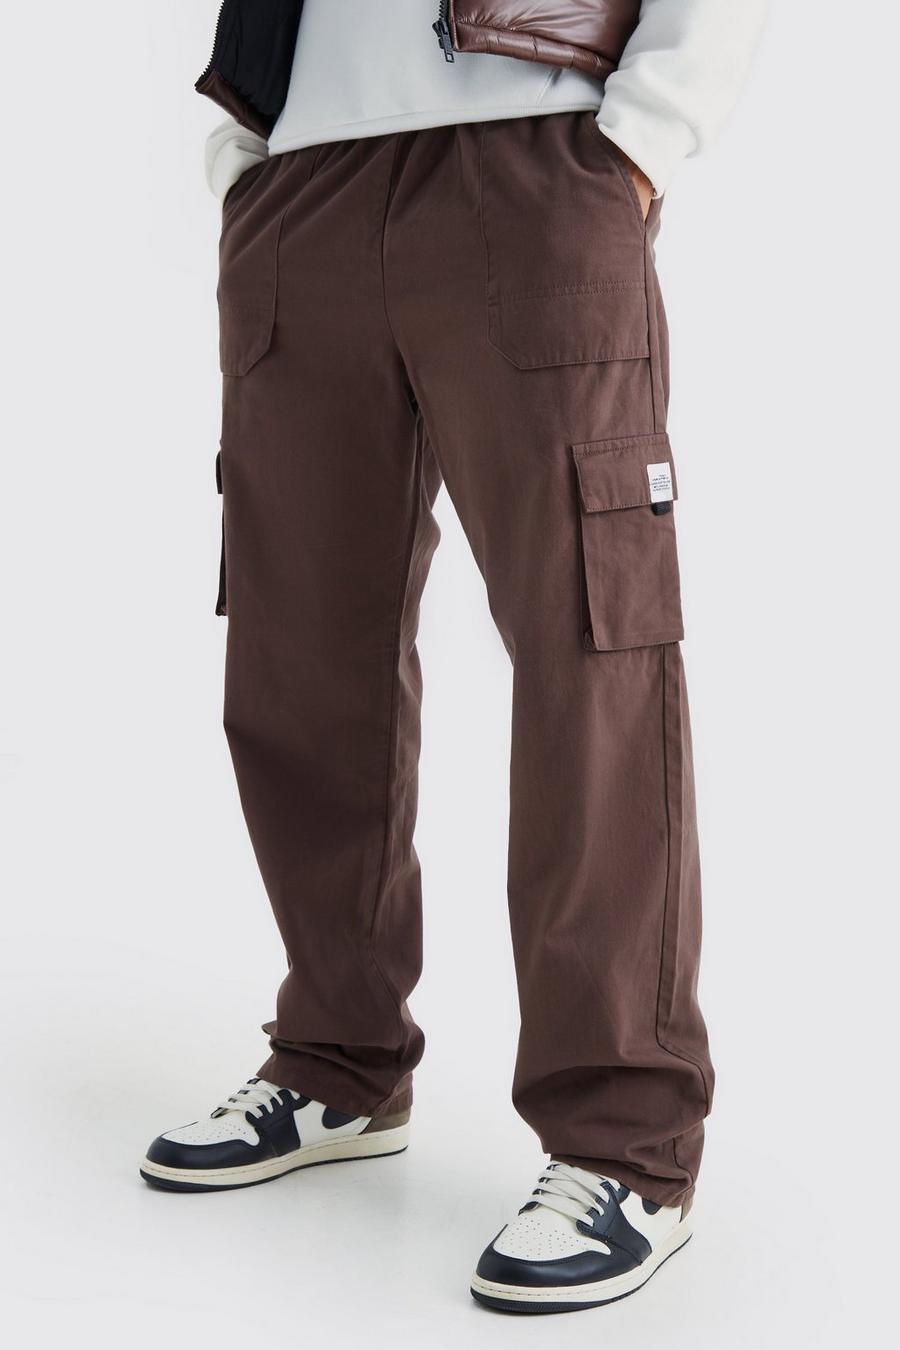 Chocolate Tall Elastic Waist Relaxed Fit Buckle Cargo Sweatpant